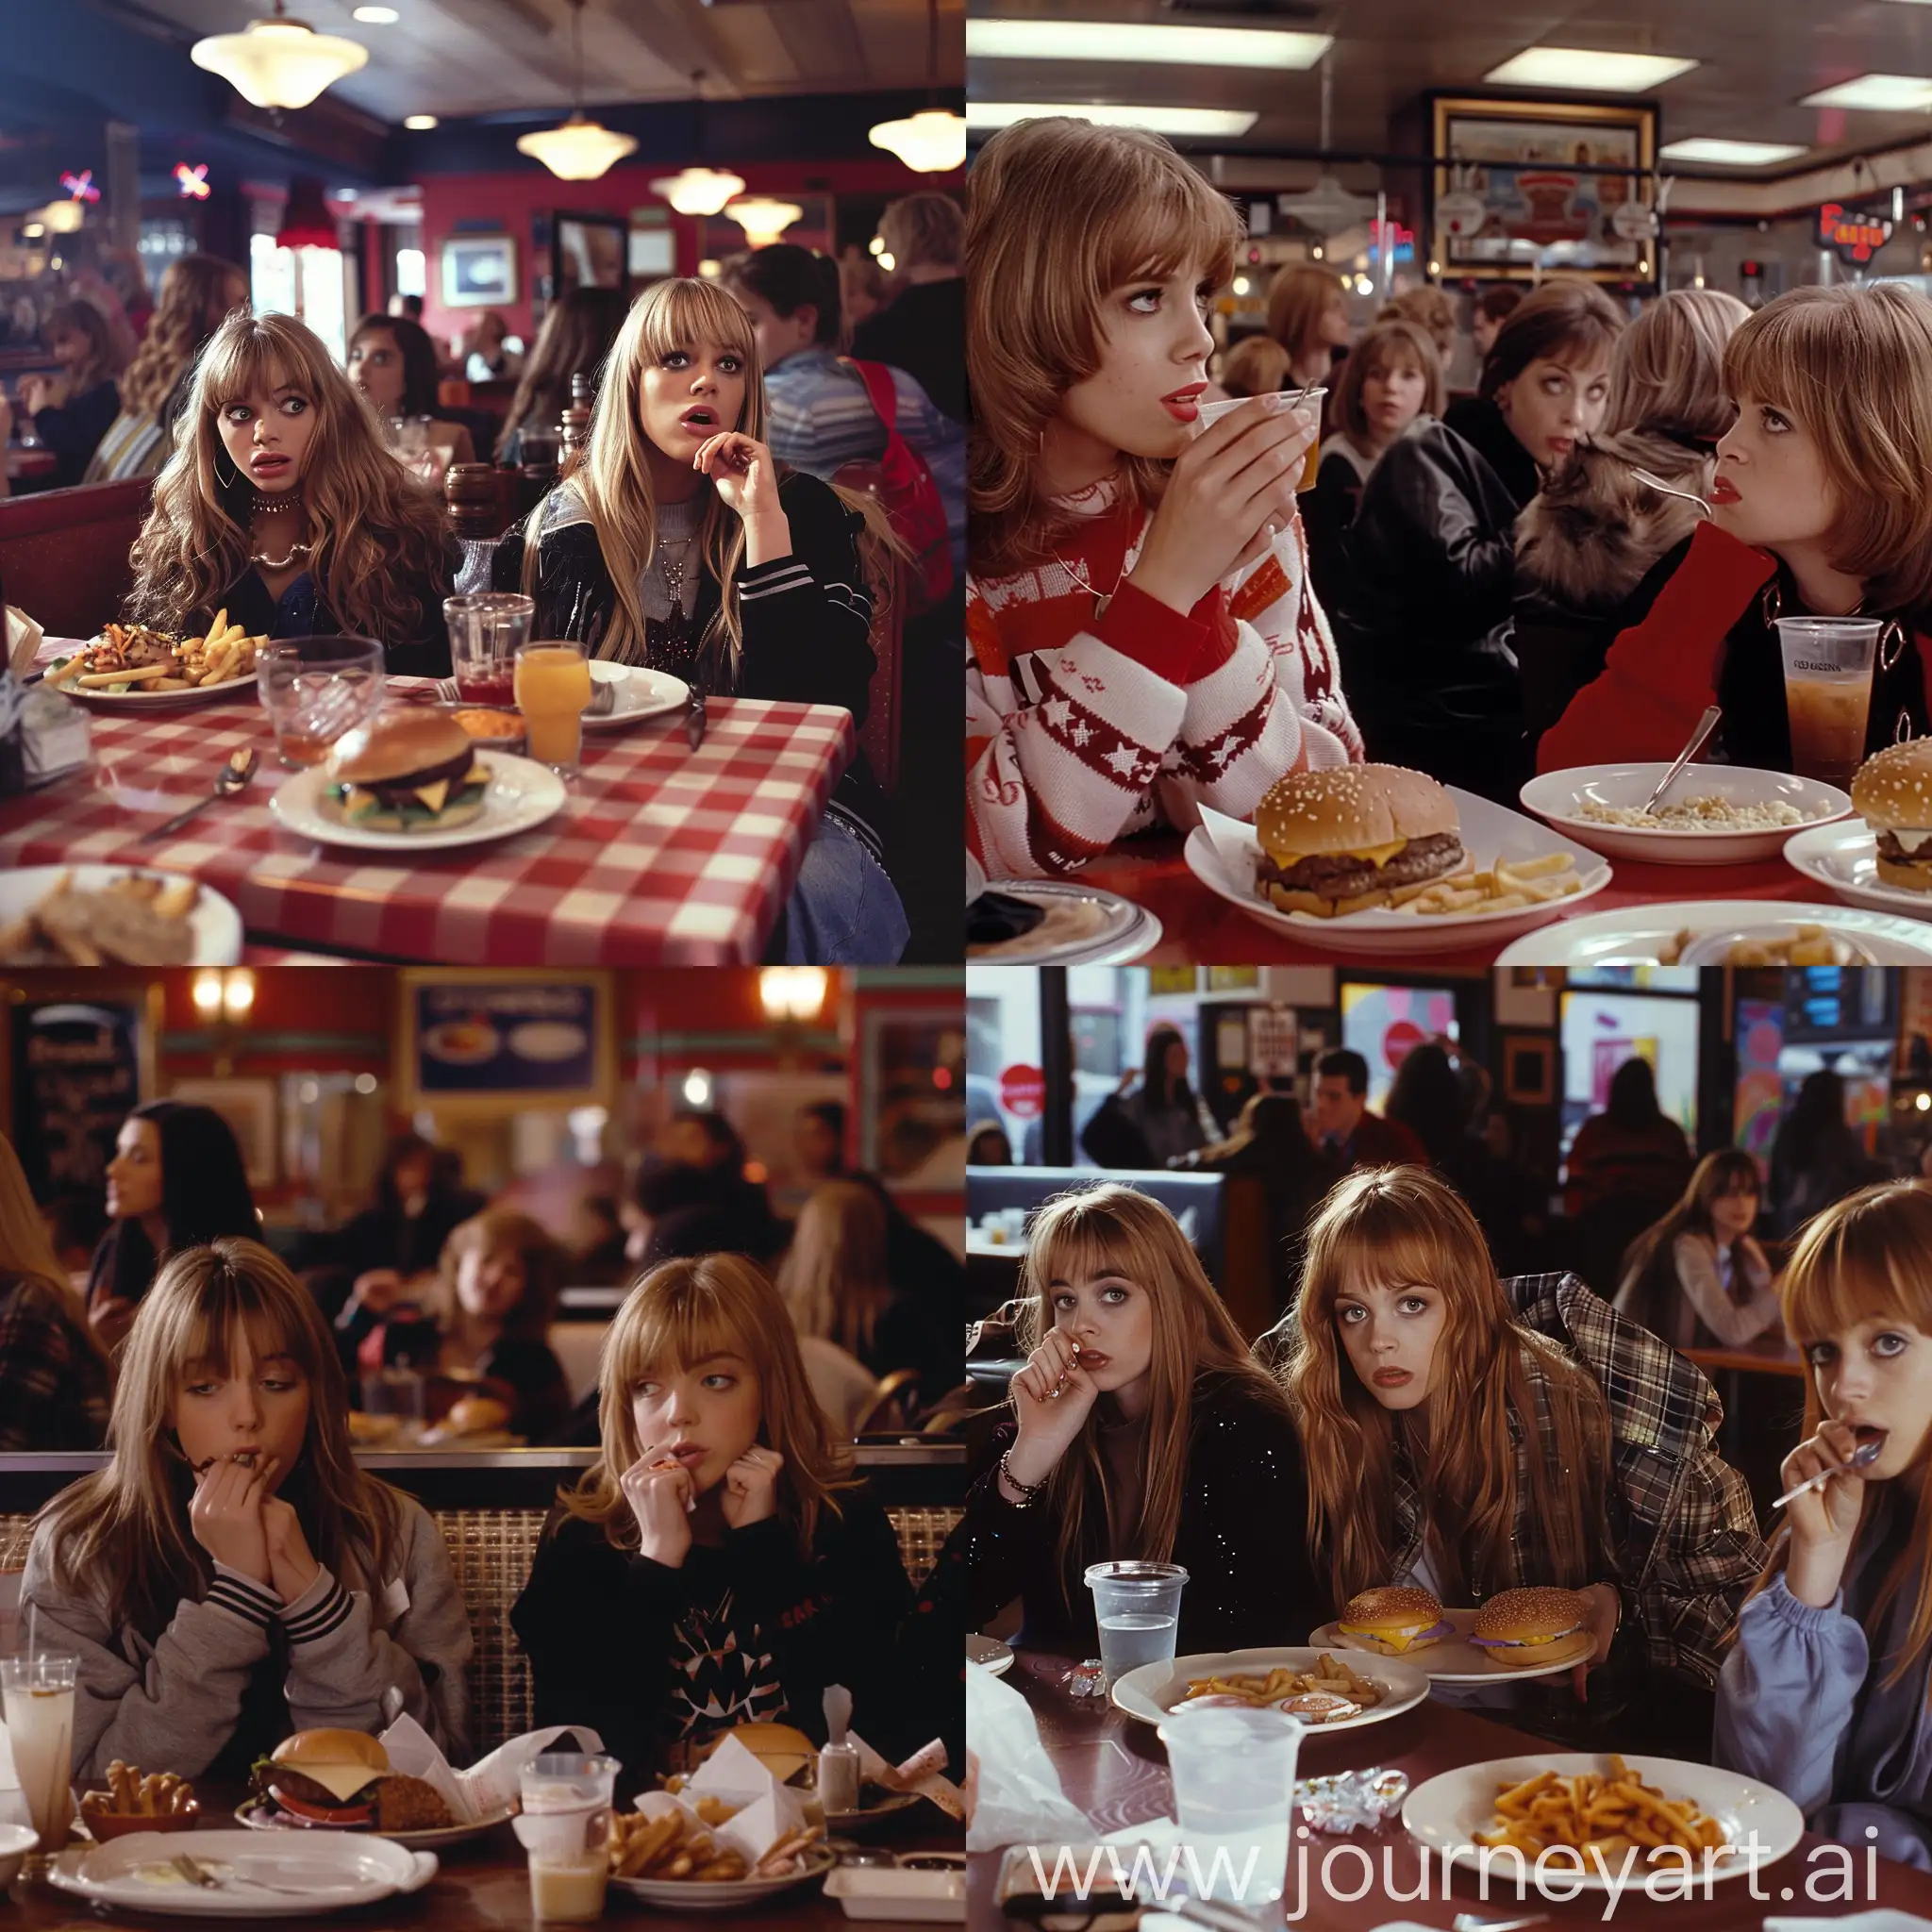 Mean-Girls-Characters-Dining-at-a-Restaurant-Scene